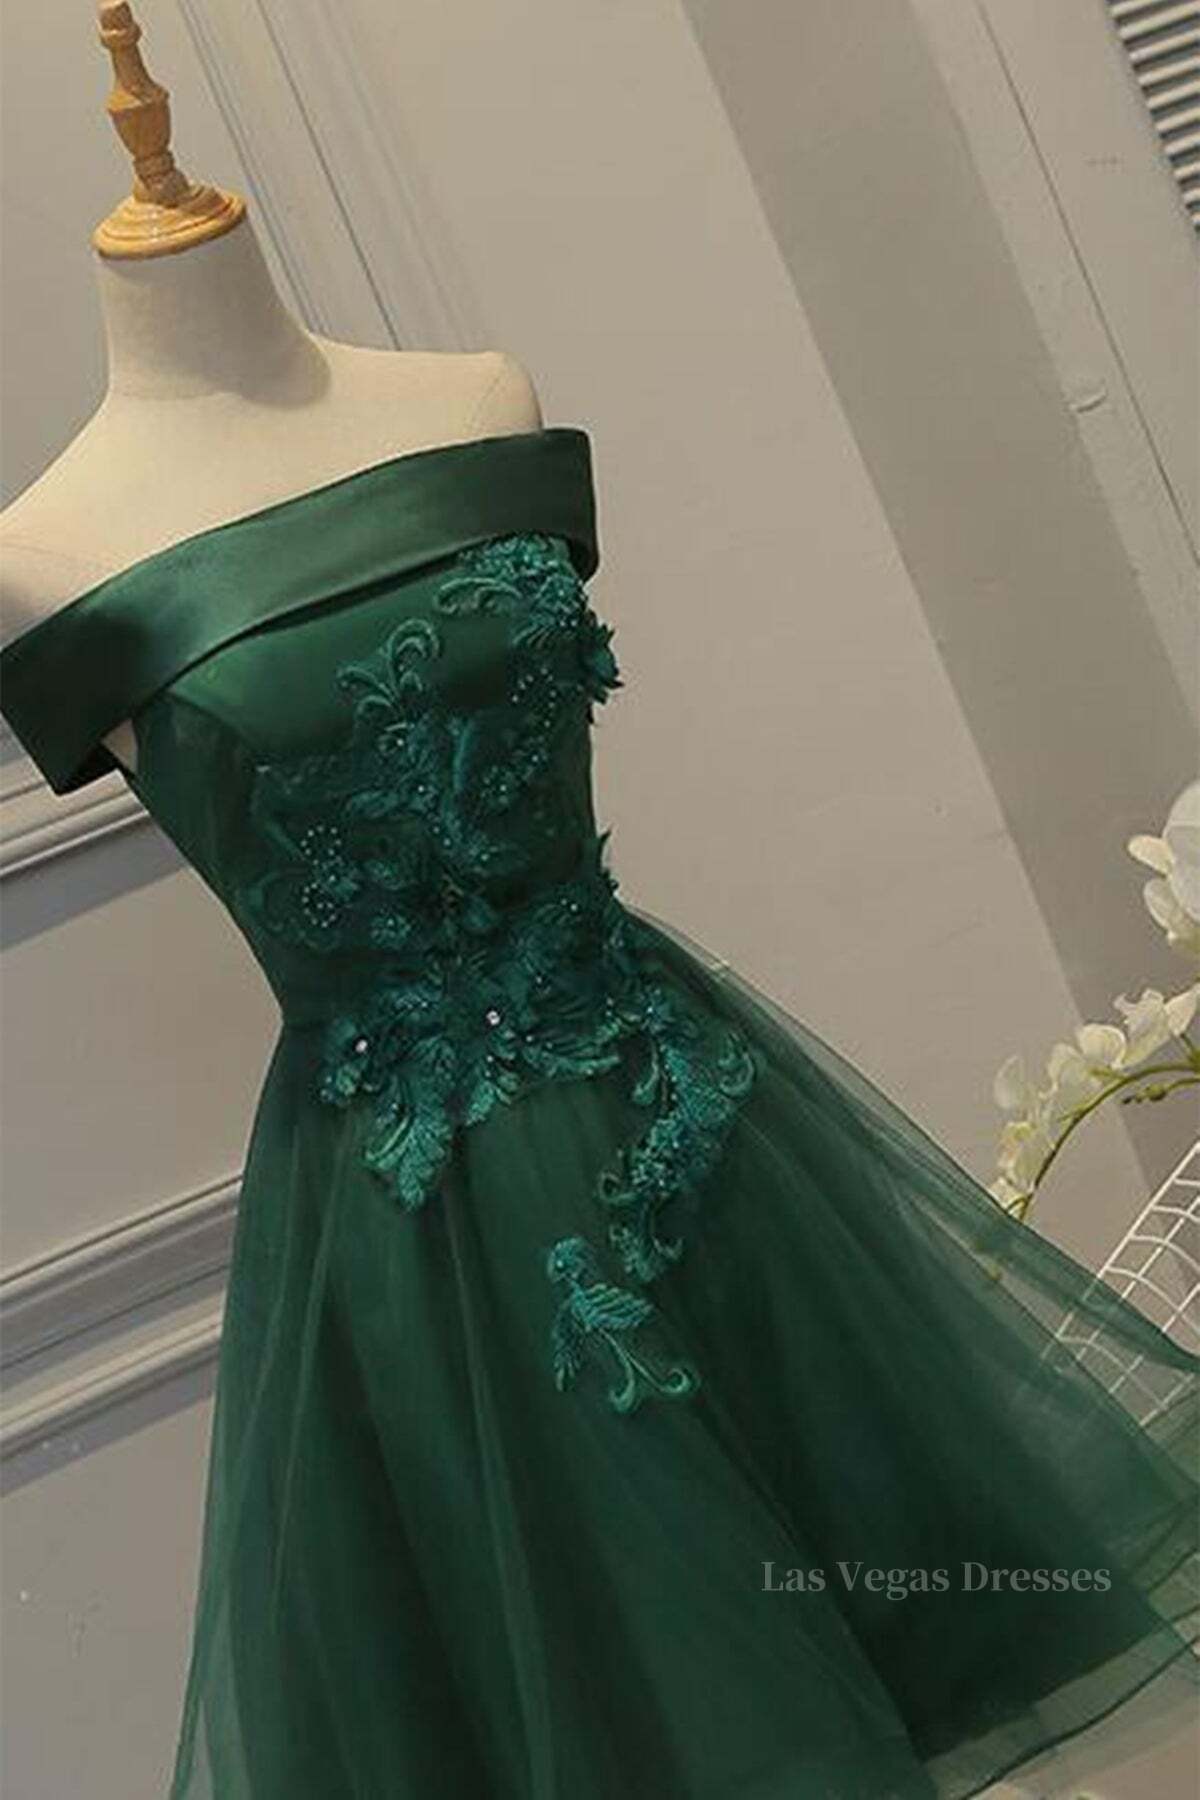 Off Shoulder Green Lace Floral Prom Dress, Short Green Lace Homecoming Dress, Green Formal Evening Dress